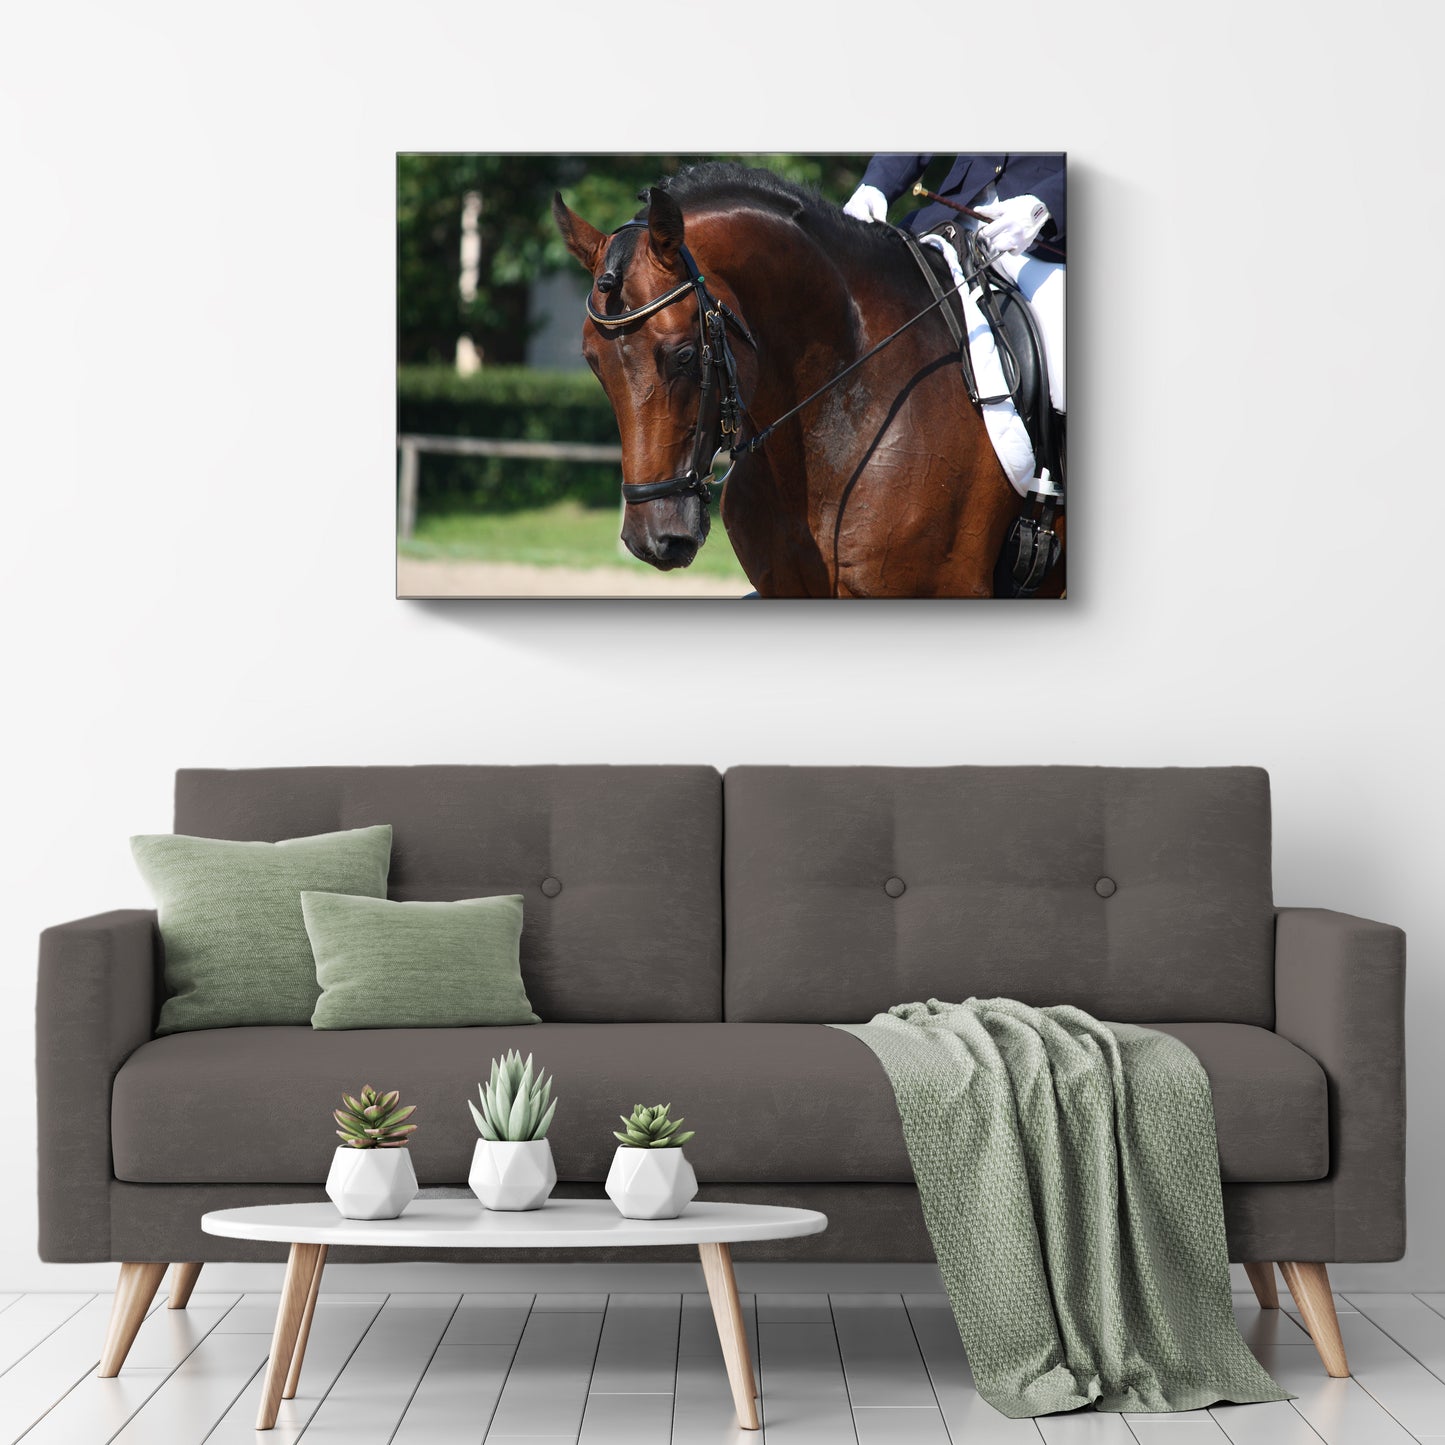 Equestrian Horse Jumping Canvas Wall Art II - Image by Tailored Canvases